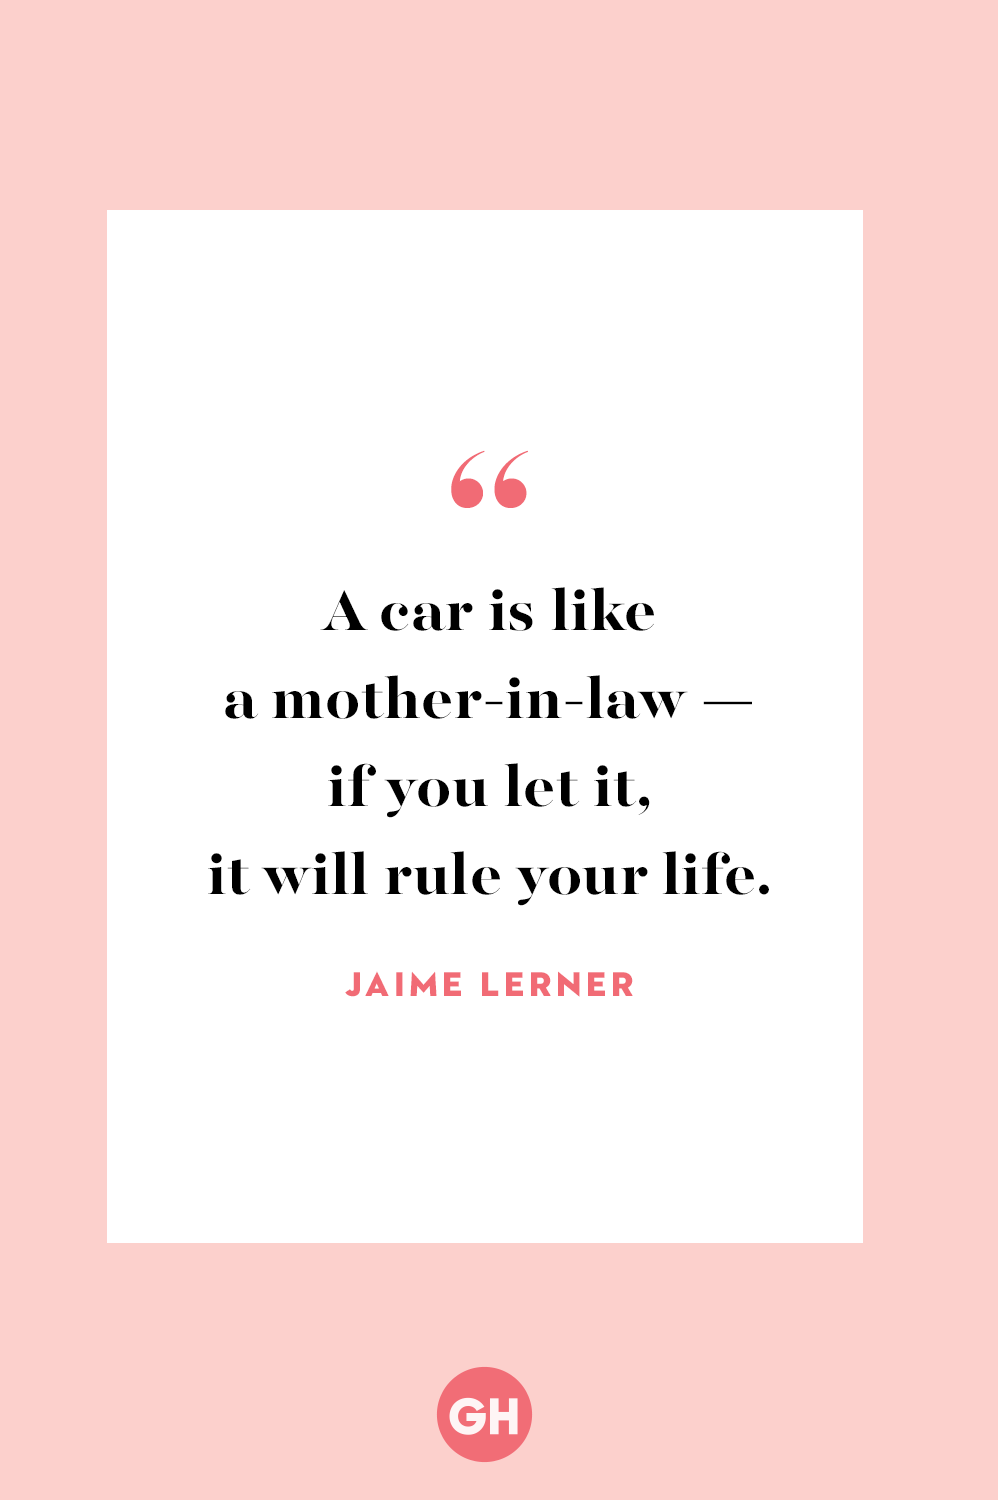 https://hips.hearstapps.com/hmg-prod/images/mother-in-law-quotes-jaime-lerner-640b8beeeb0d9.png